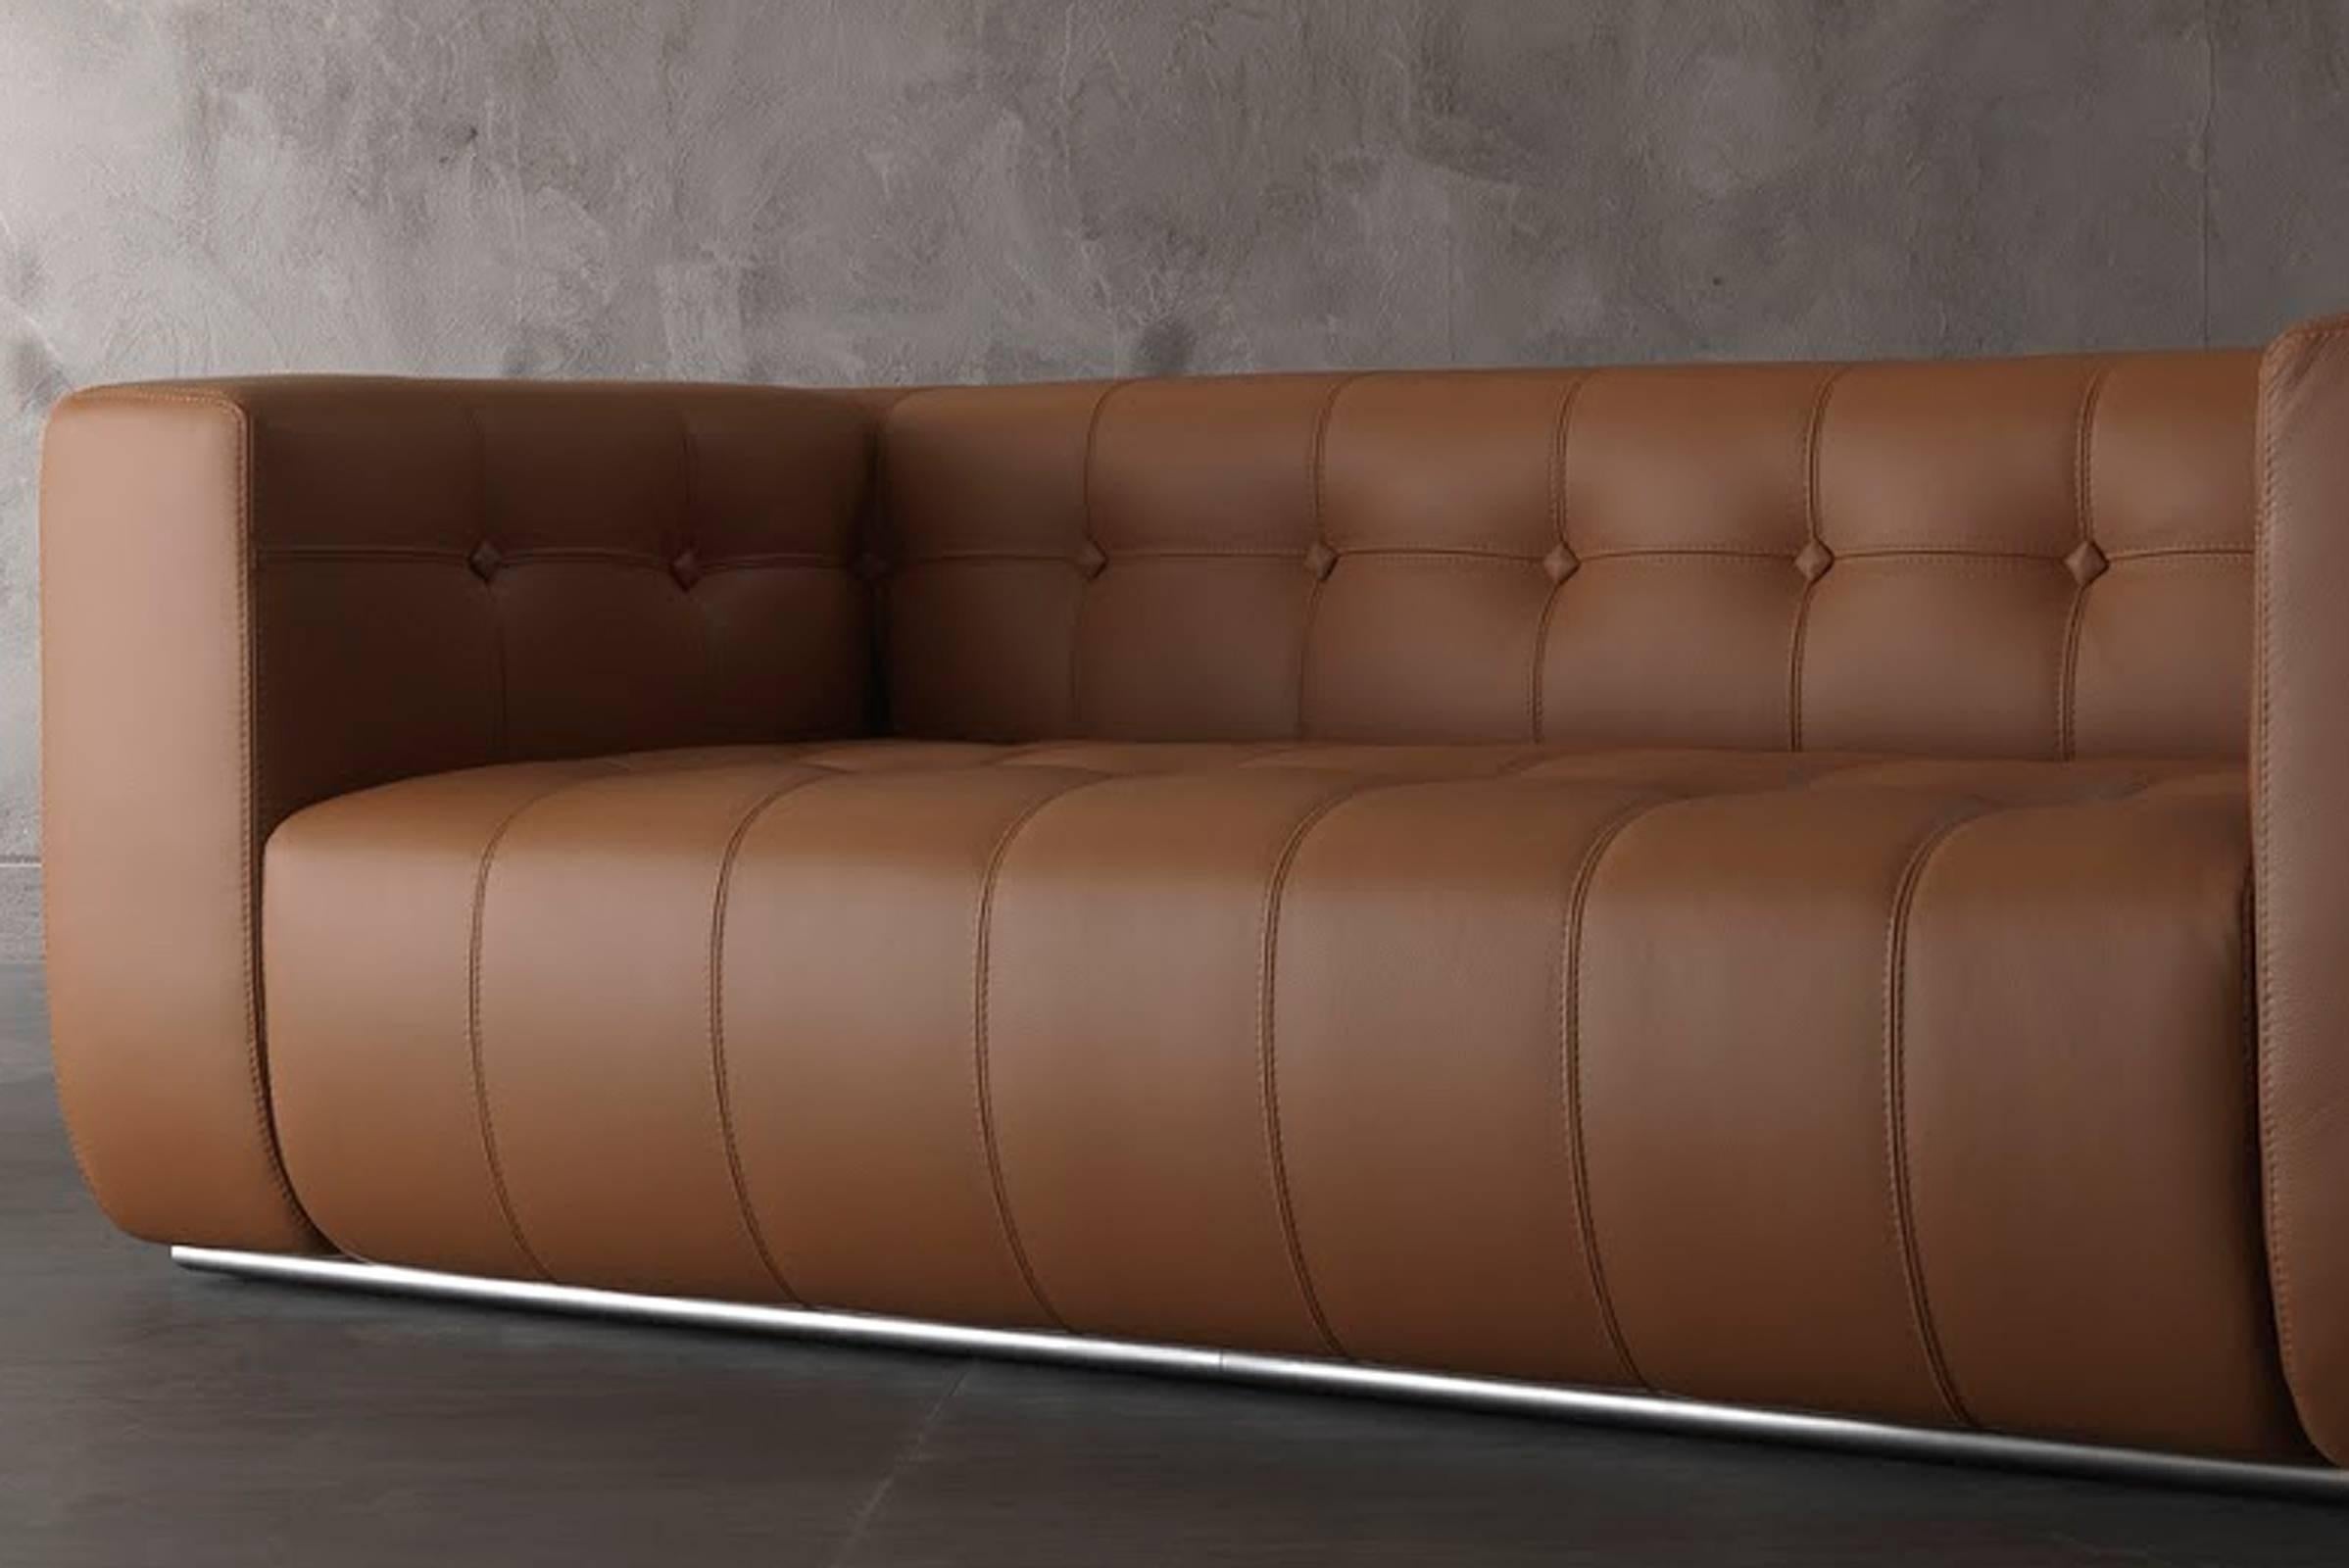 Fabric Challenger Sofa in Brown Leather in High Quality